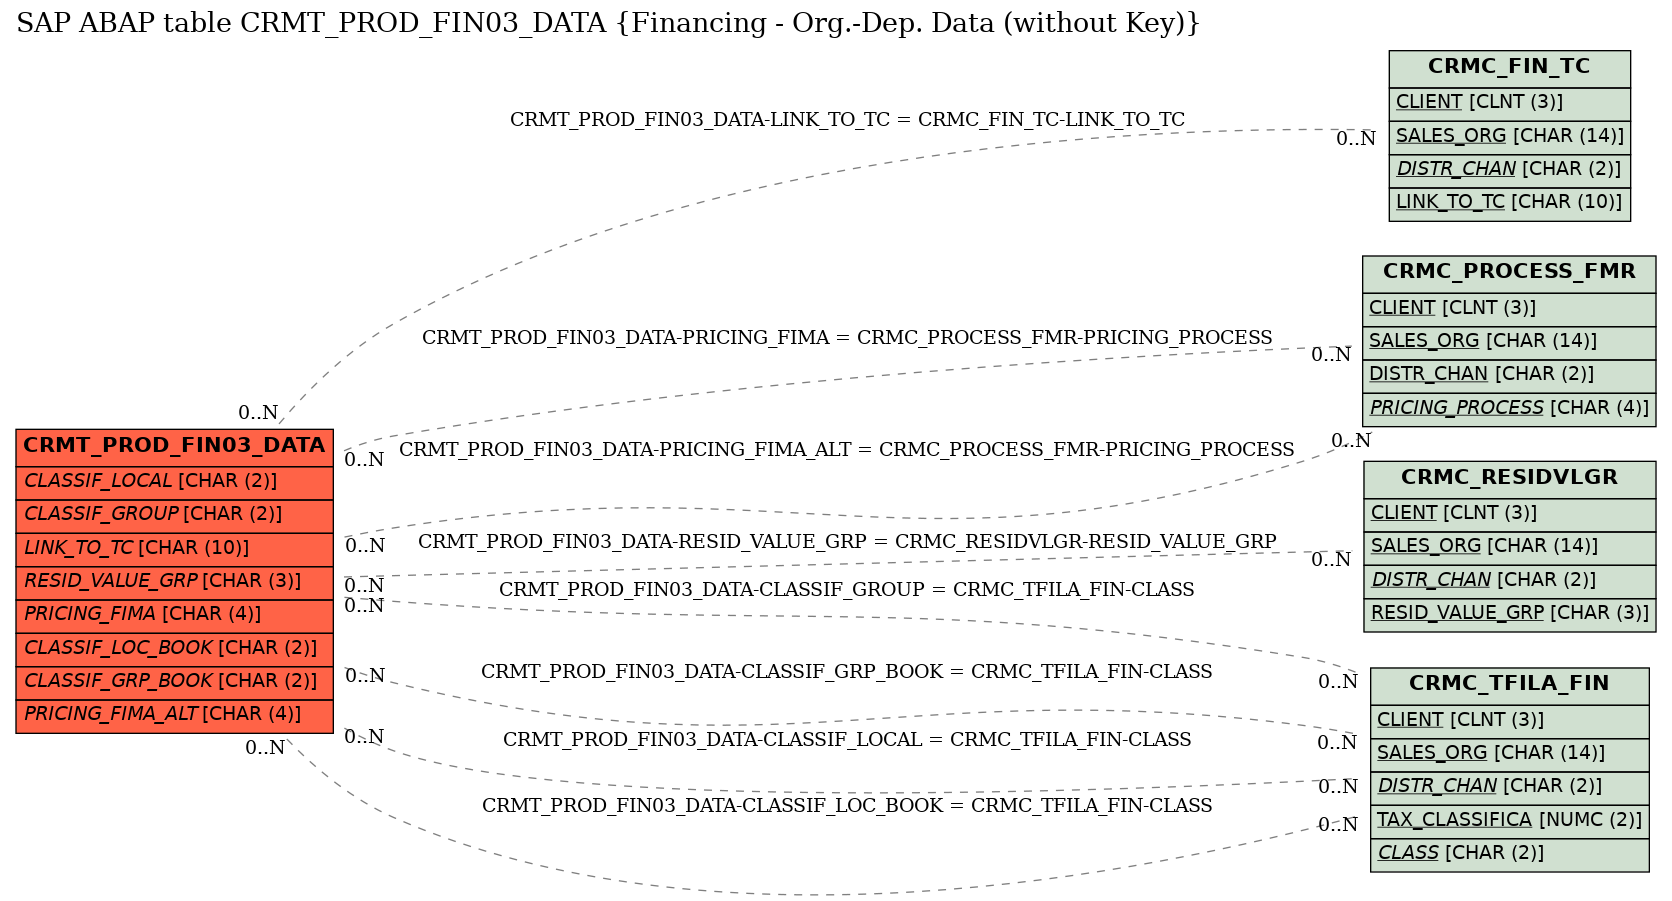 E-R Diagram for table CRMT_PROD_FIN03_DATA (Financing - Org.-Dep. Data (without Key))